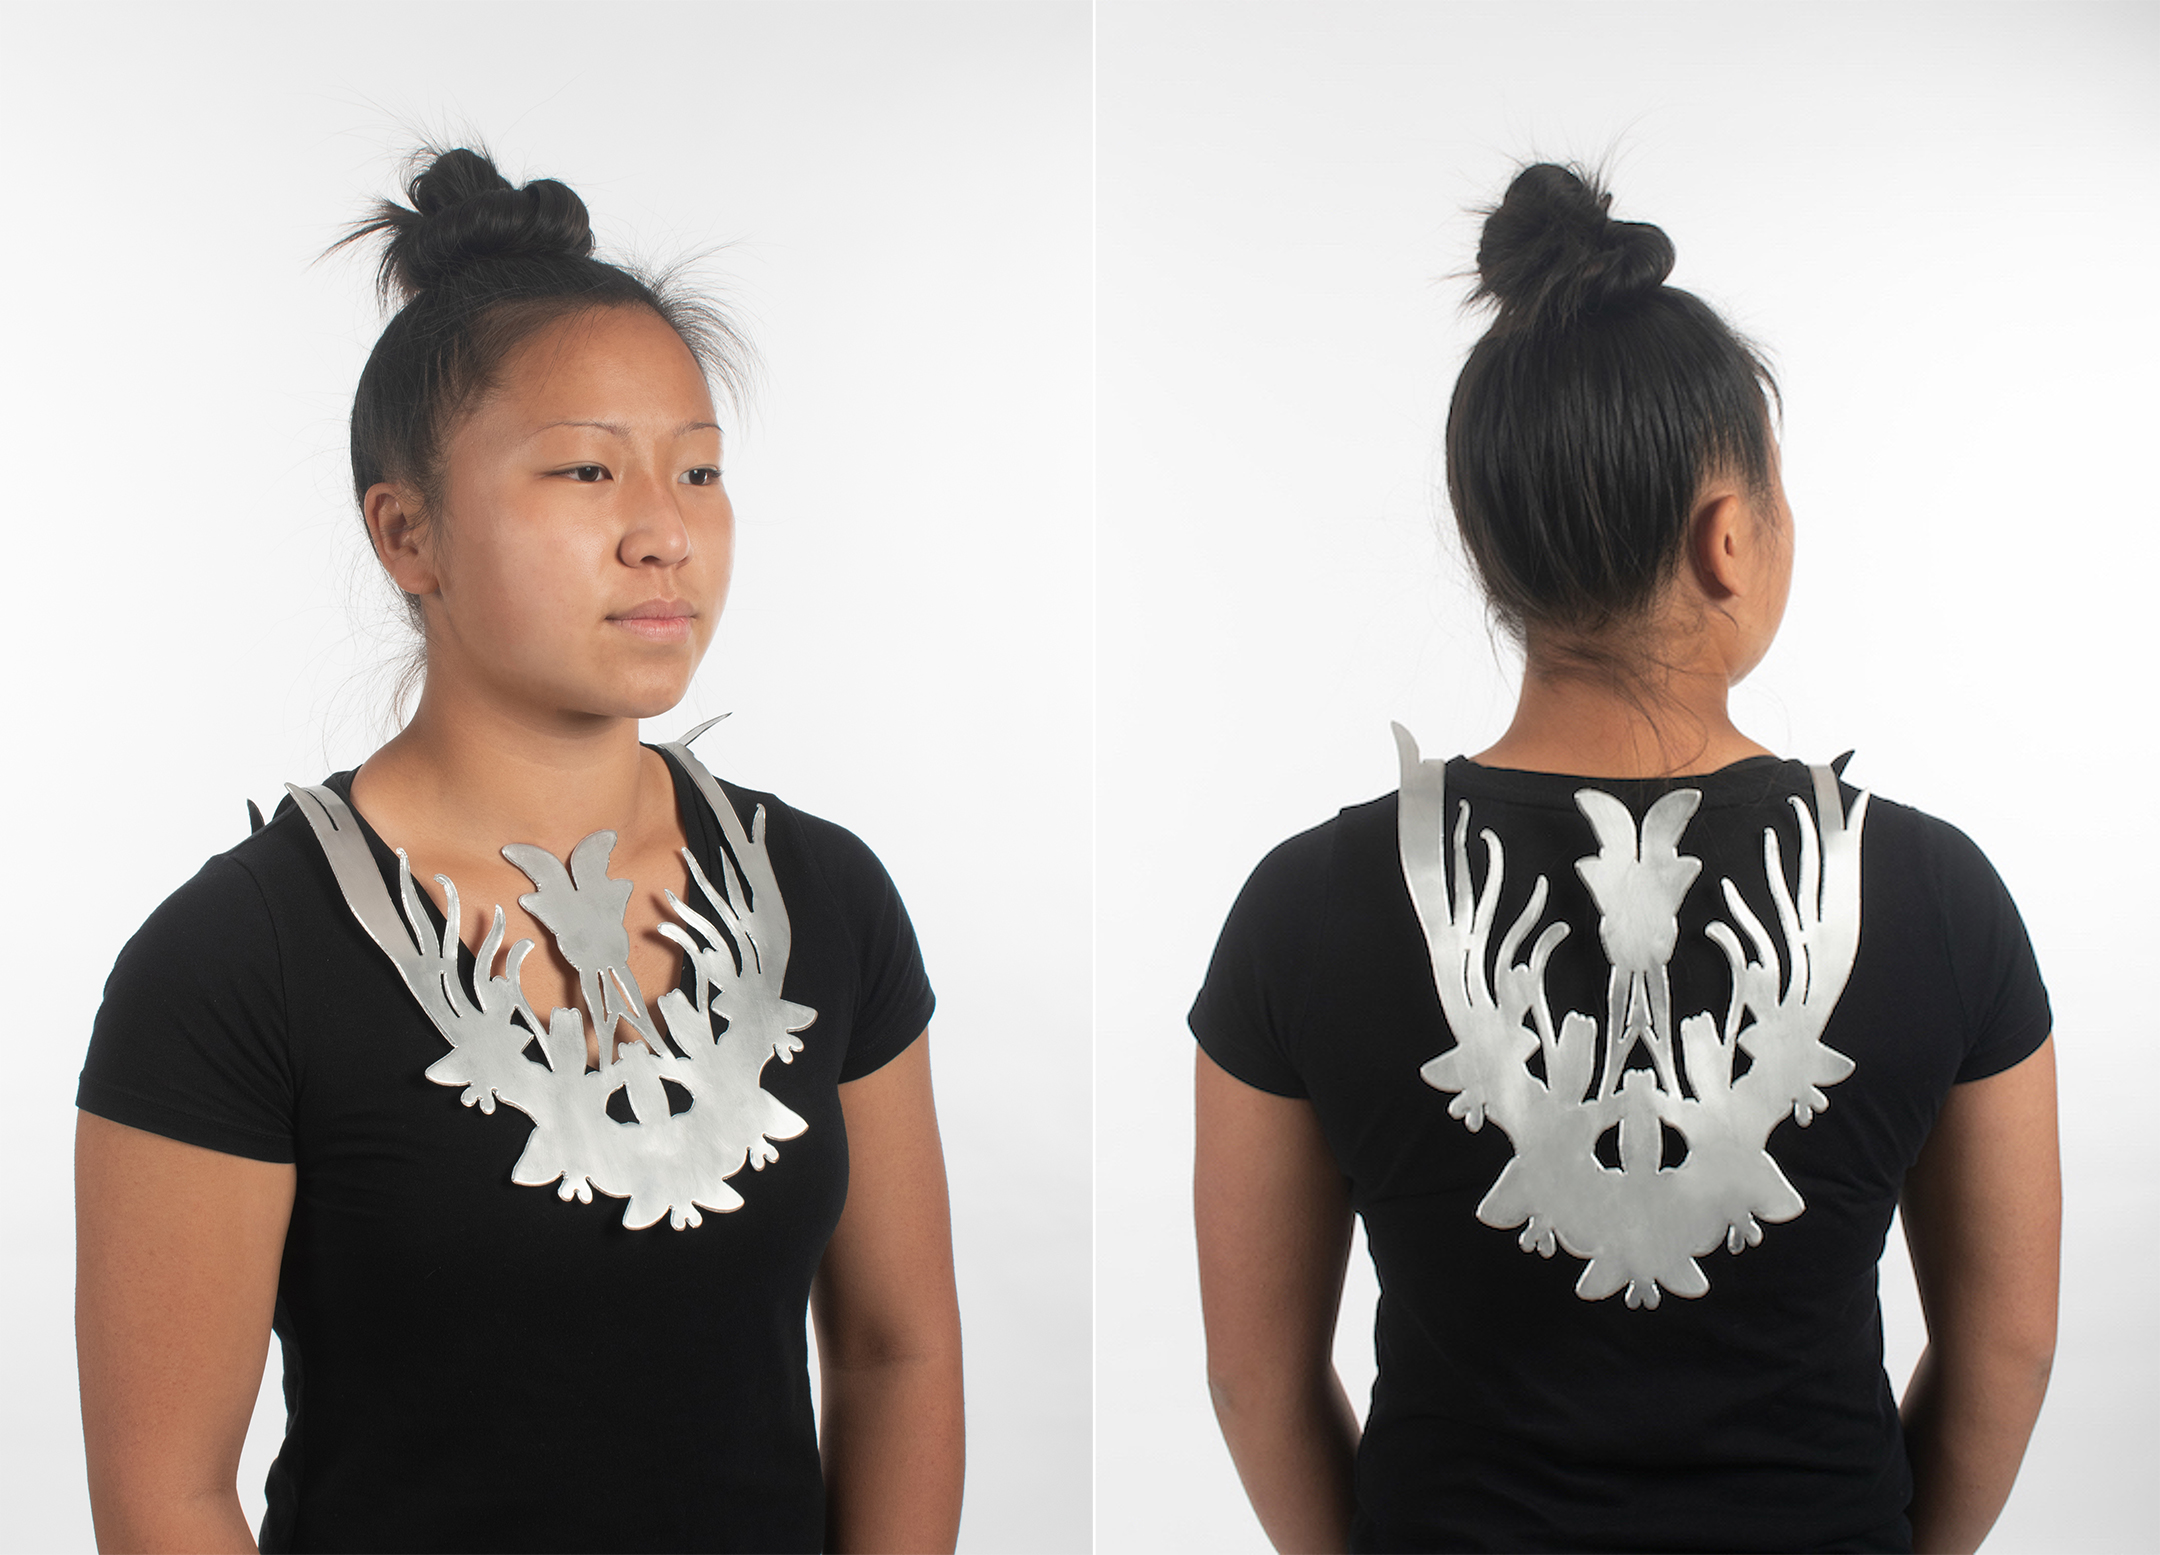 Photo of a young Asian woman with a heavy metal necklace in the shape of a winged animal